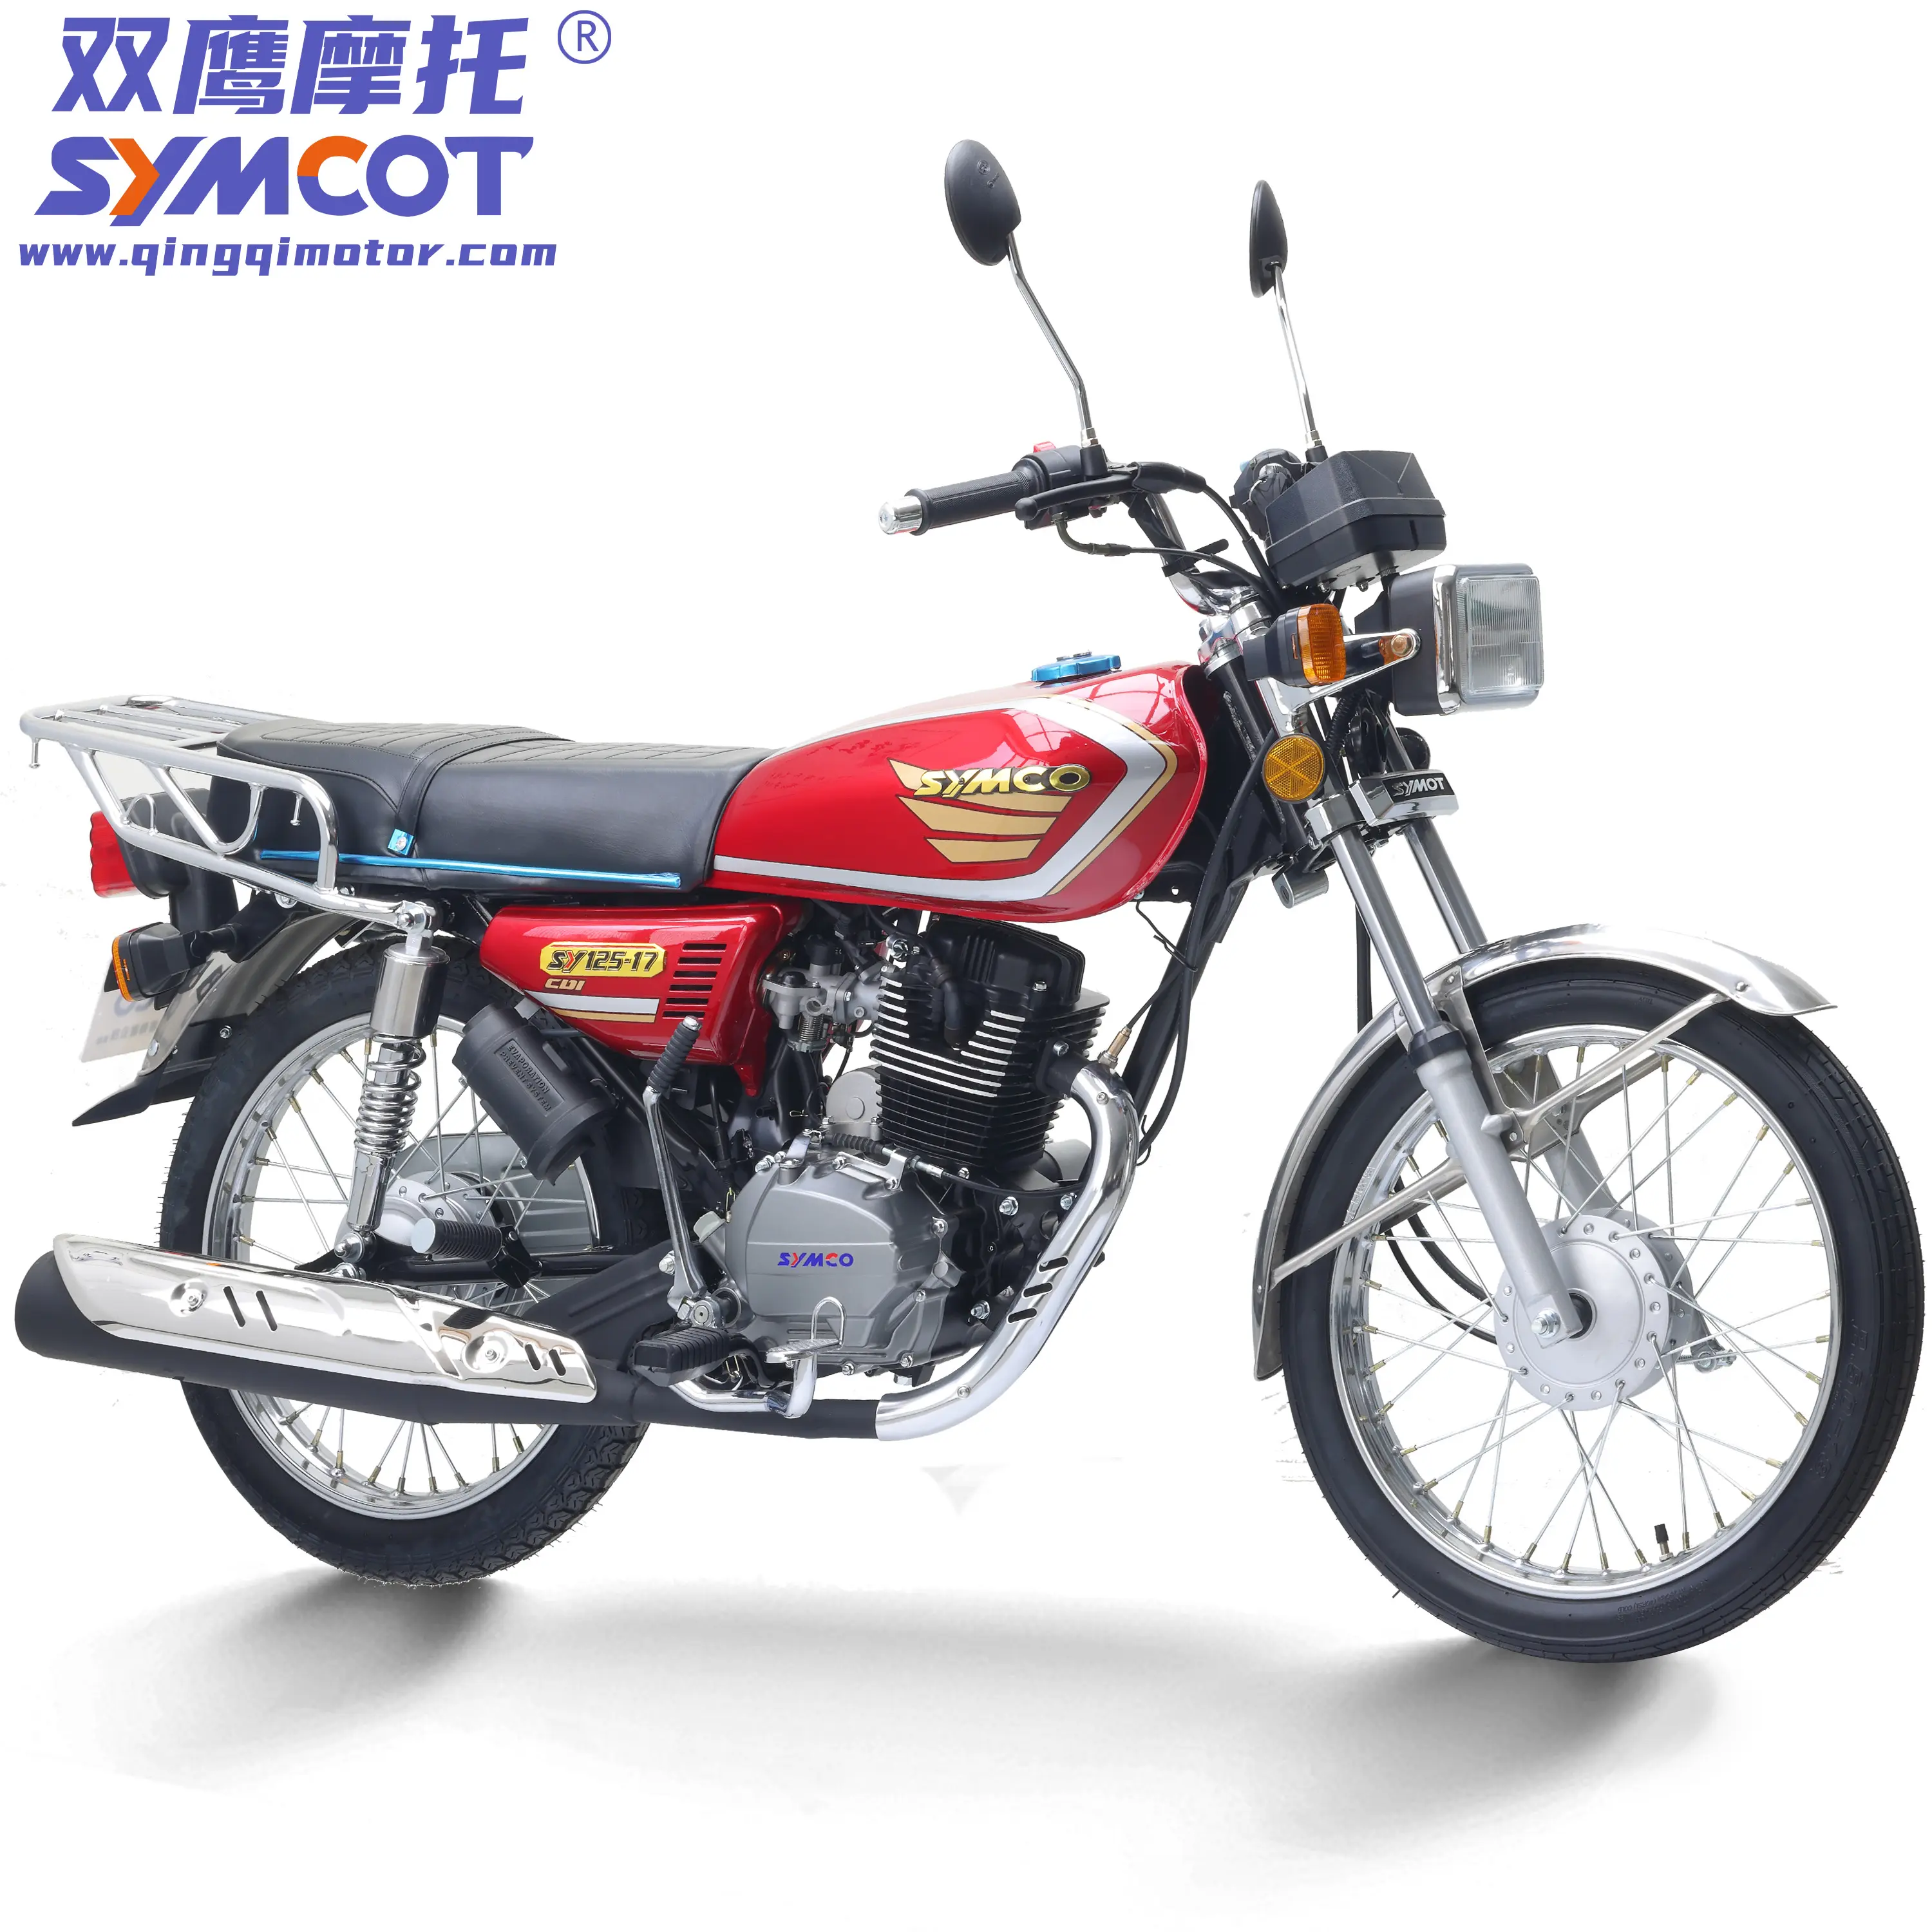 Cheap china motorcycle CG125 CG150 CG175 Economical street motorcycle model with high quality finishing ready to ship